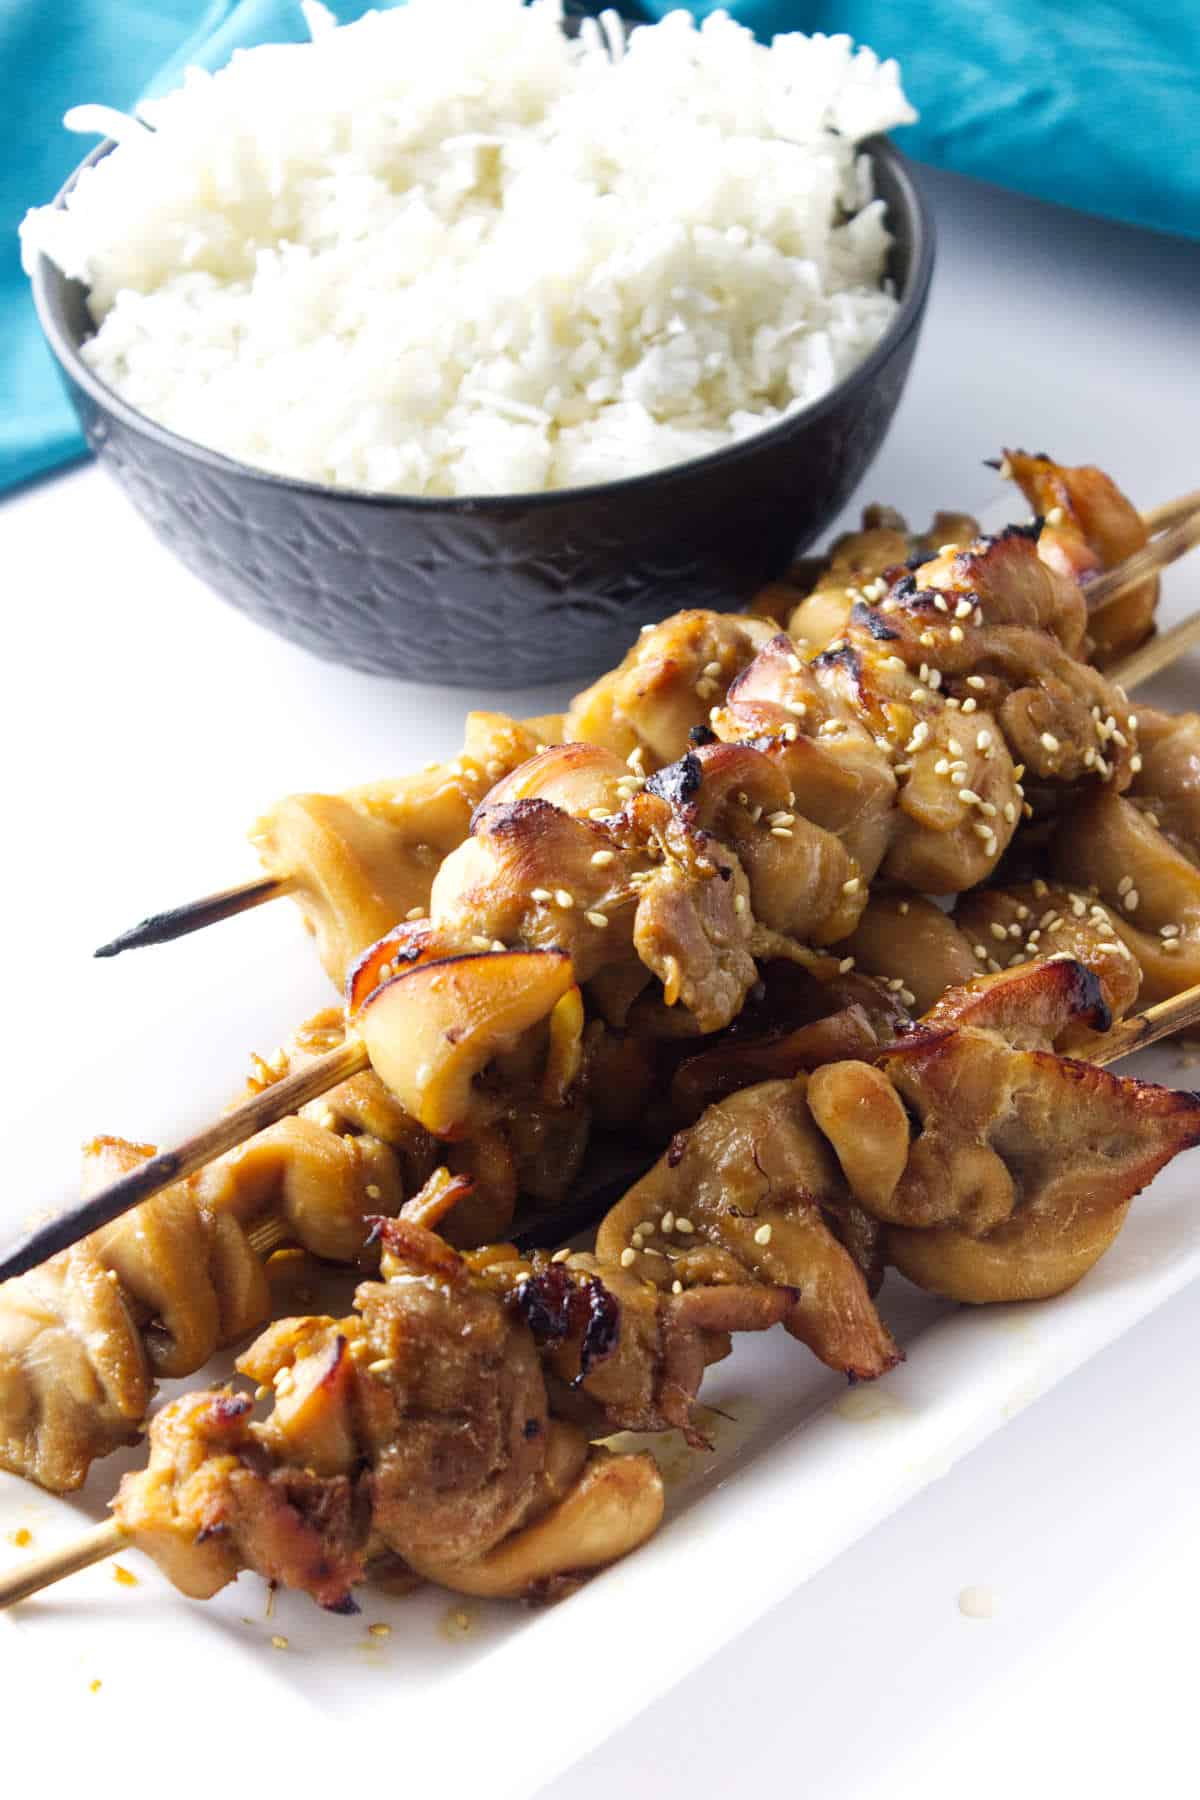 Platter of teriyaki chicken skewers and a bowl of white steamed rice.